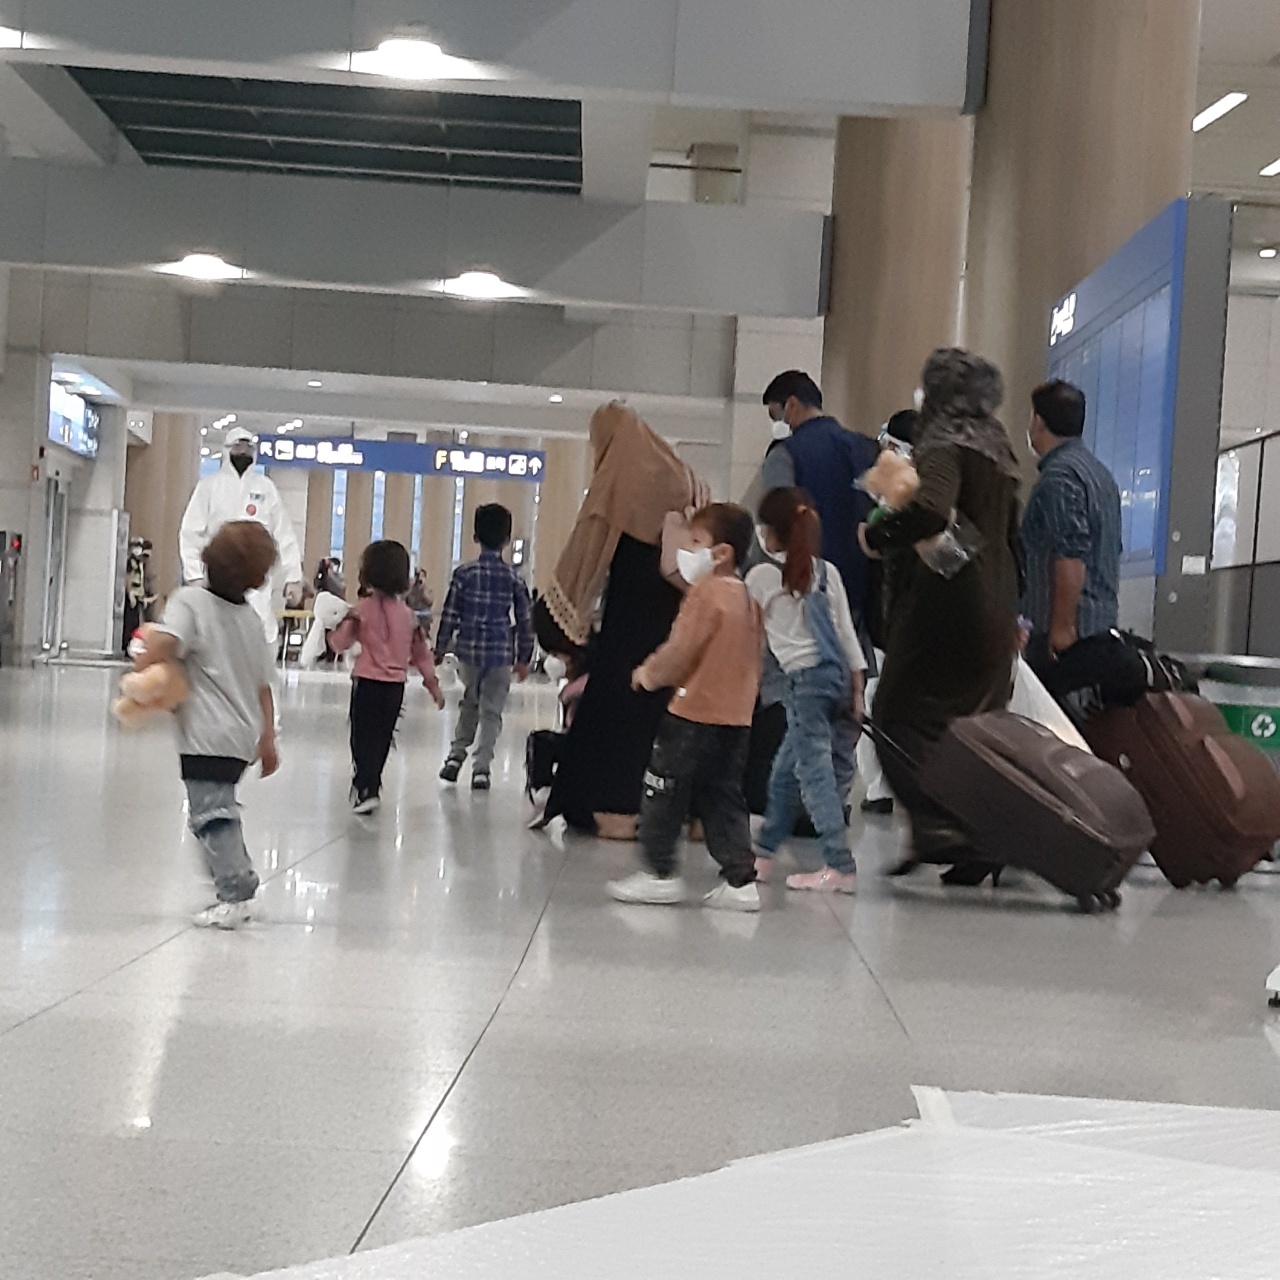 Afghan families walk toward the exit after passing immigration at Incheon Airport on Thursday evening. (Shin Ji-hye/The Korea Herald)